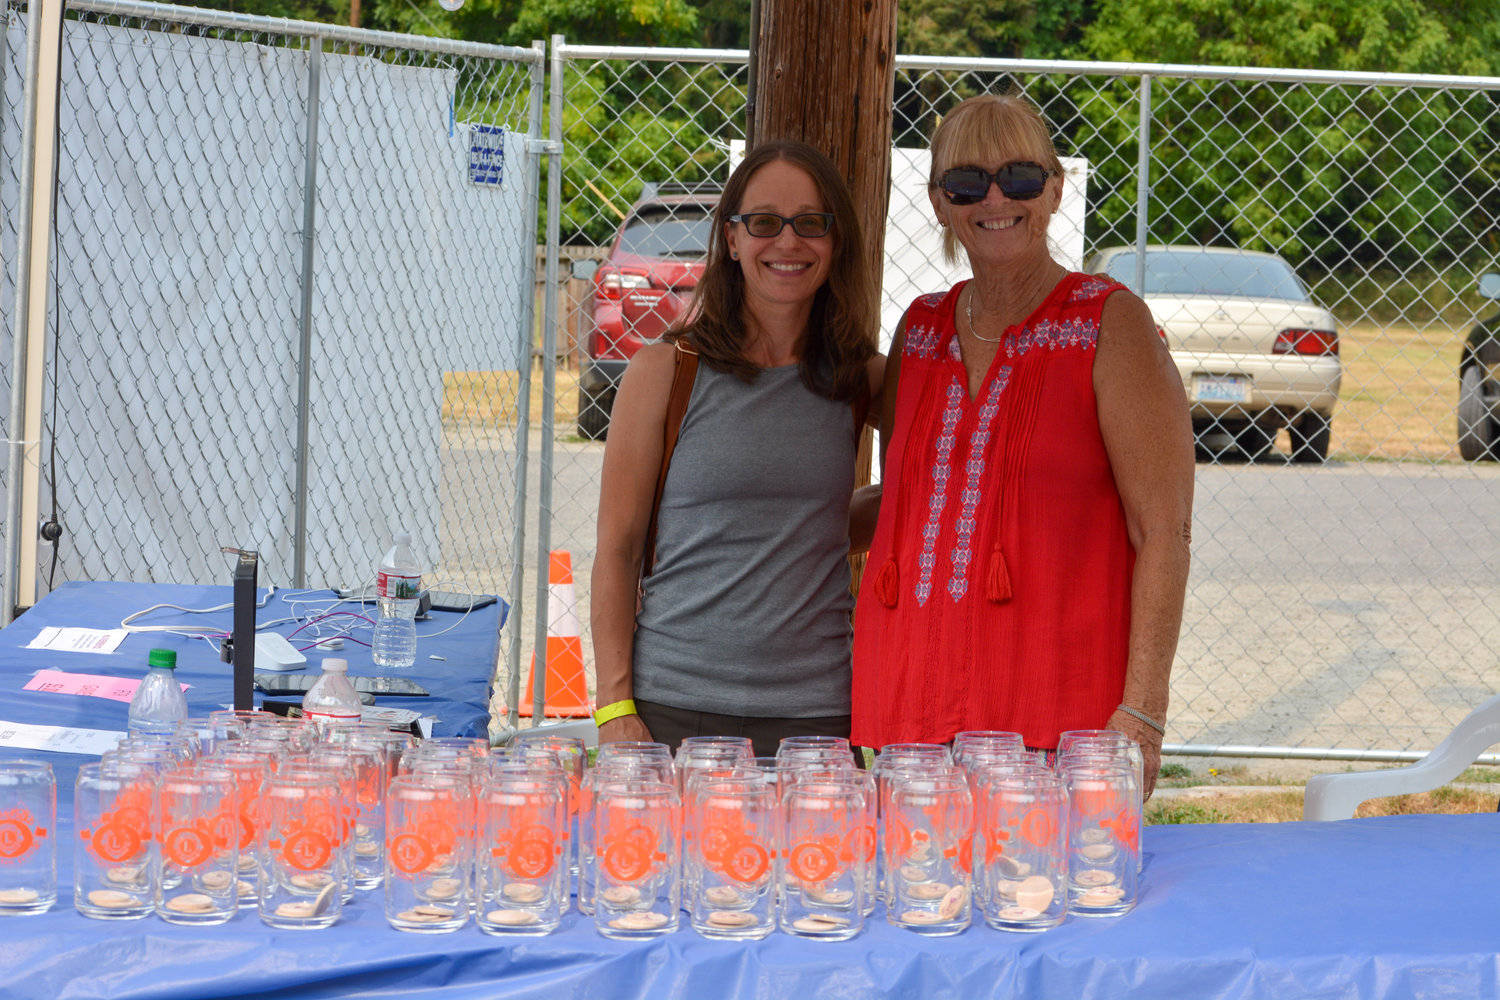 Volunteers pass out commemorative beverage glasses at the Ridgefield Sausage Festival on Aug. 14 at Abrams Park.